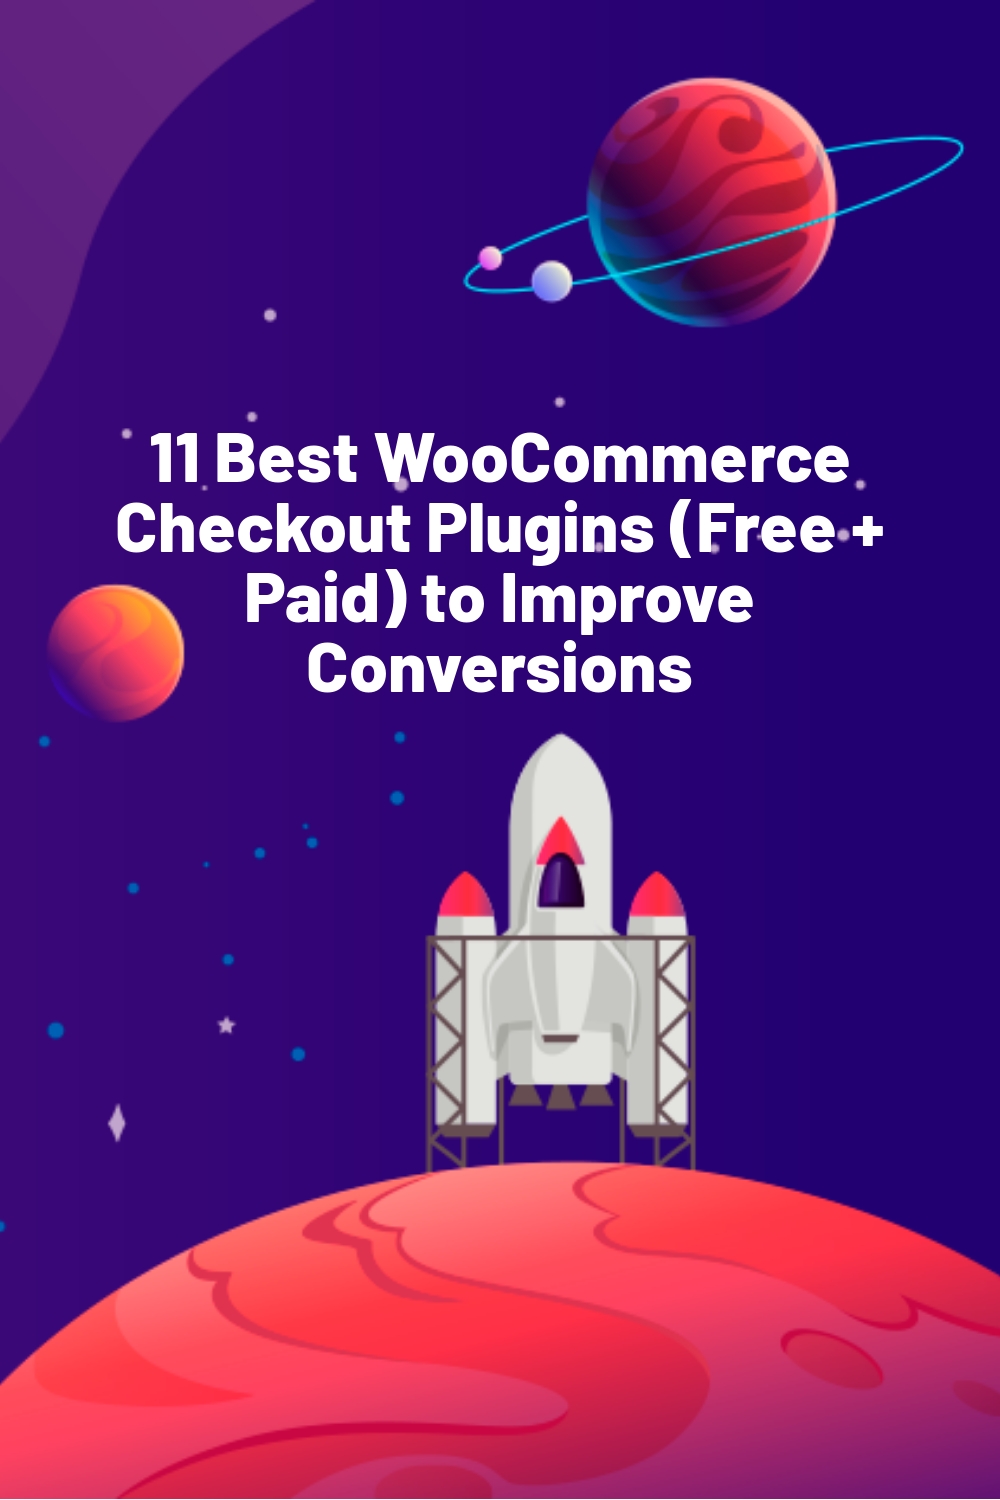 11 Best WooCommerce Checkout Plugins (Free + Paid) to Improve Conversions